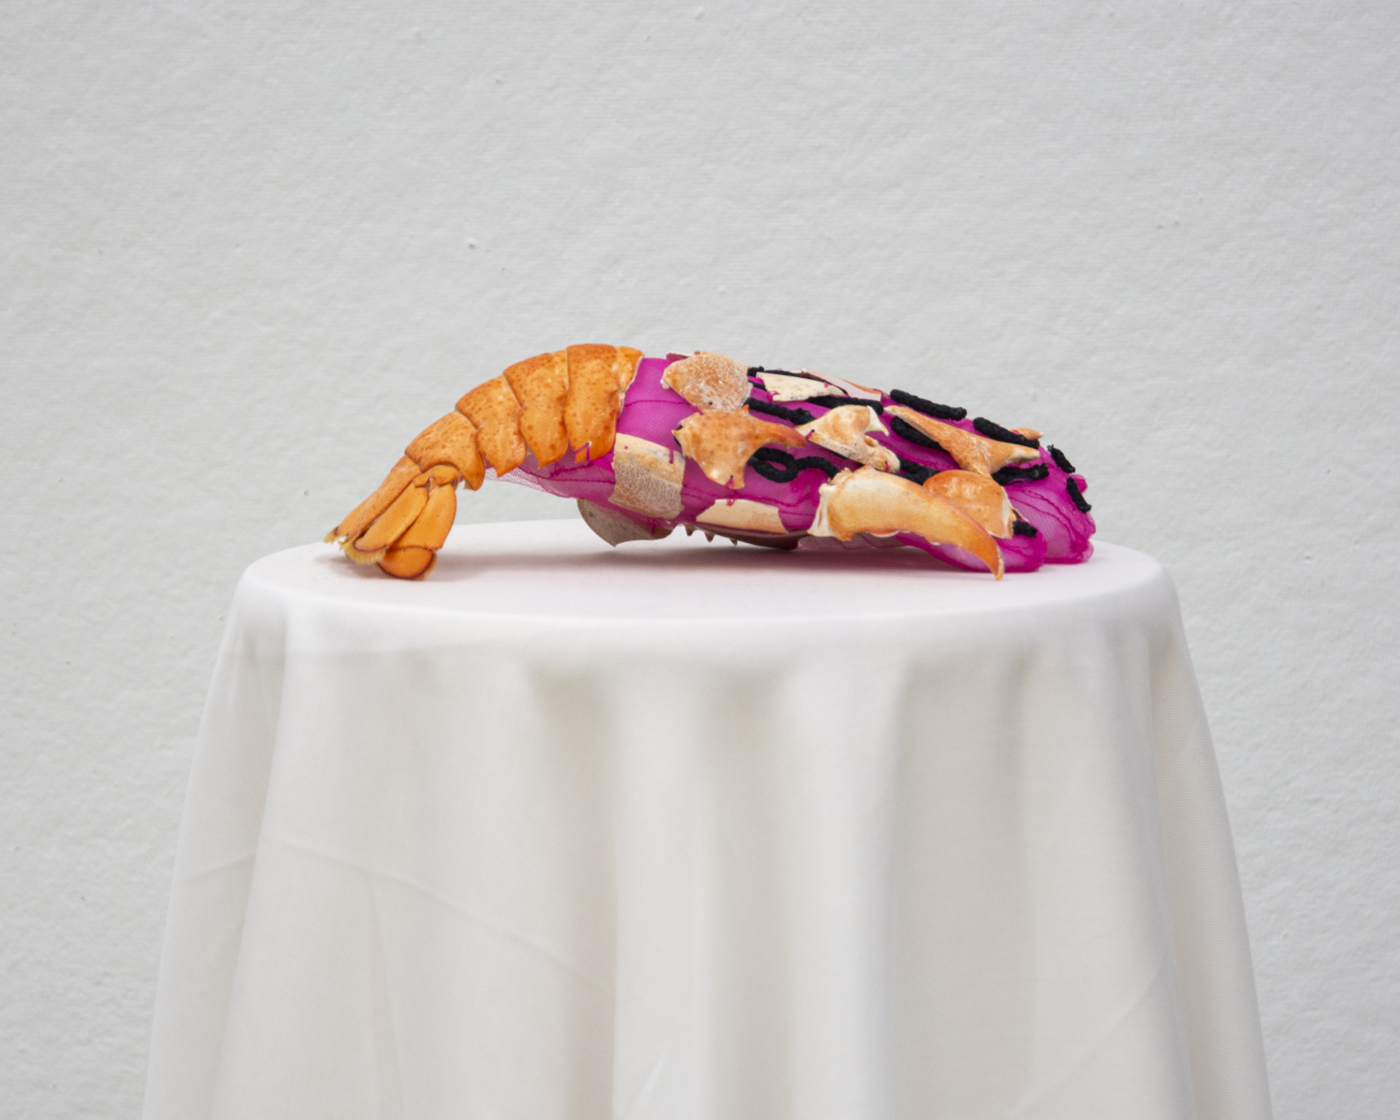 a pink tulle glove covered by lobster shells sits on top of a white fabric draped over a circular surface